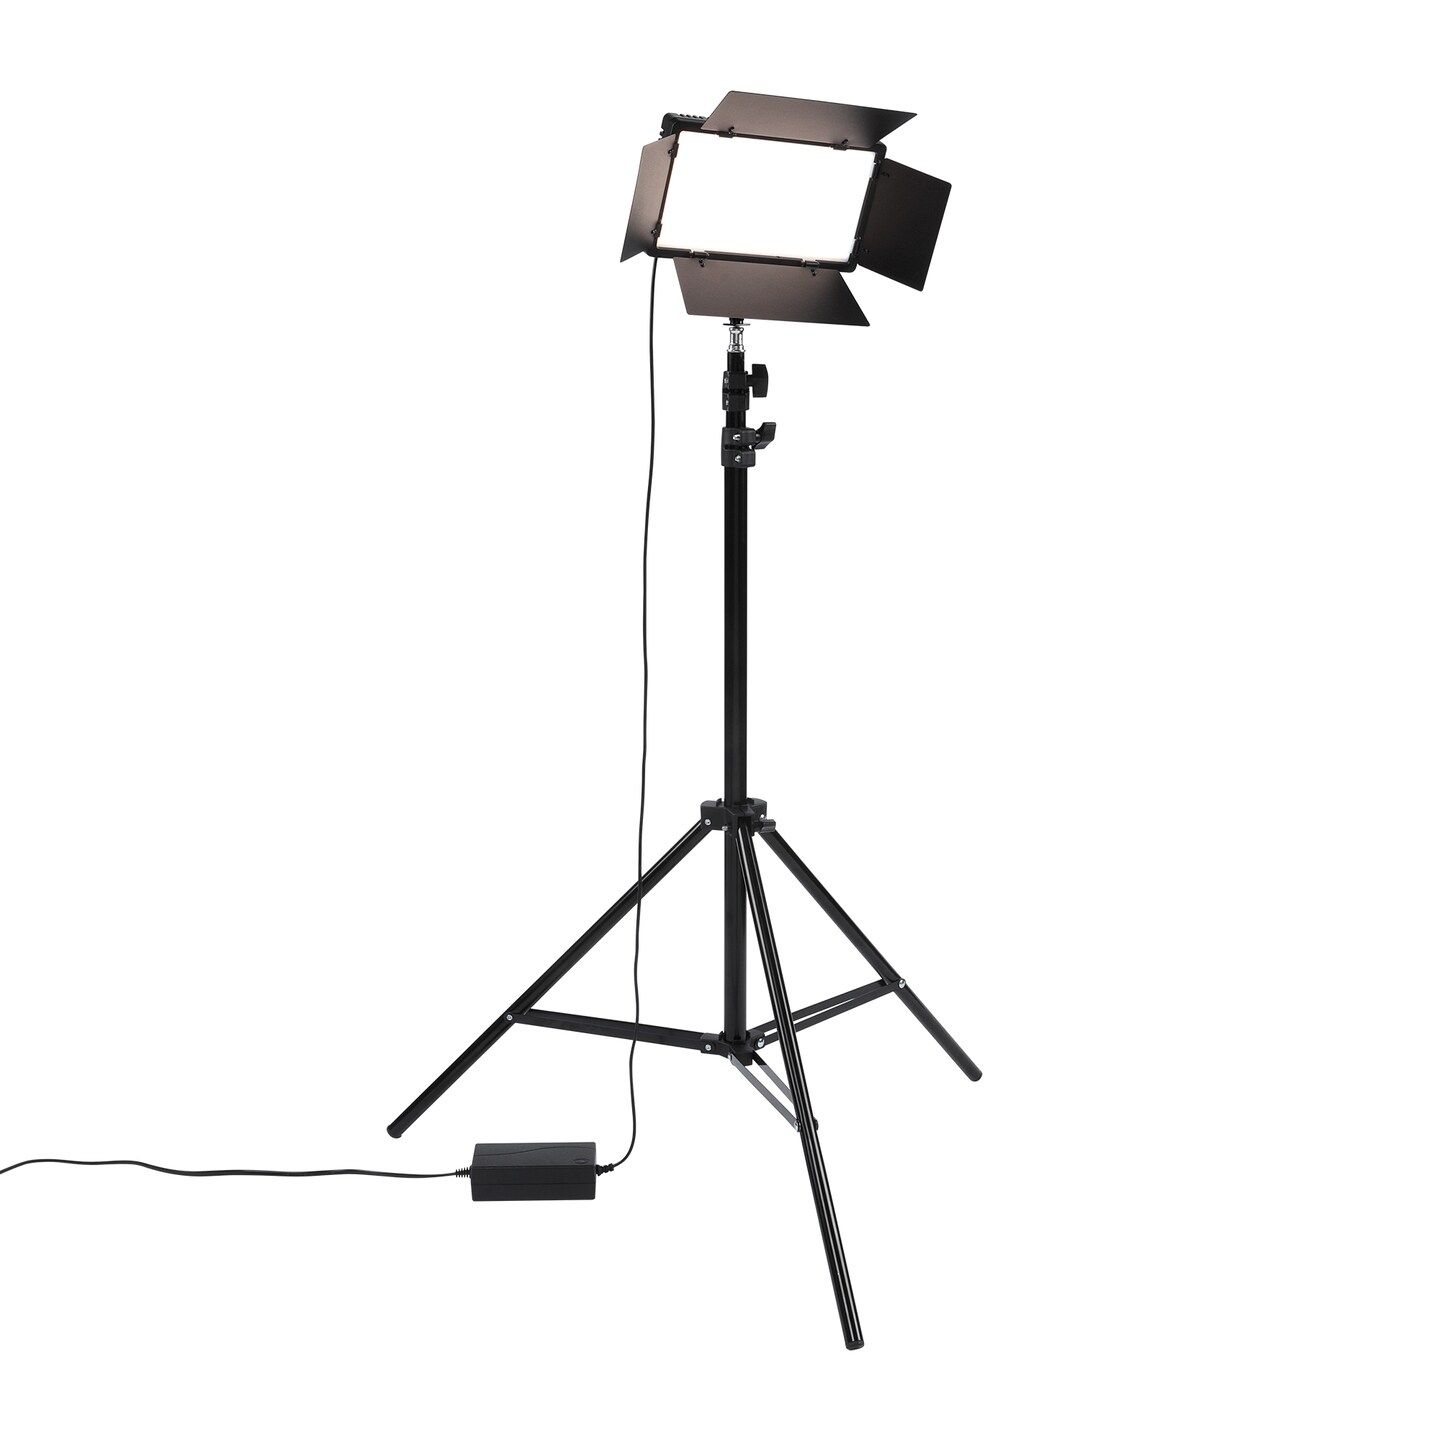 Acurit Colorview Lux Artist Studio Light - Adjustable Photography Lighting Kit 3 Color Temps, 4 Metal Barn Doors, 4160 Lumens LED - Remote Control, AC Power Supply, 6&#x27;6&#x22; Light Stand Included